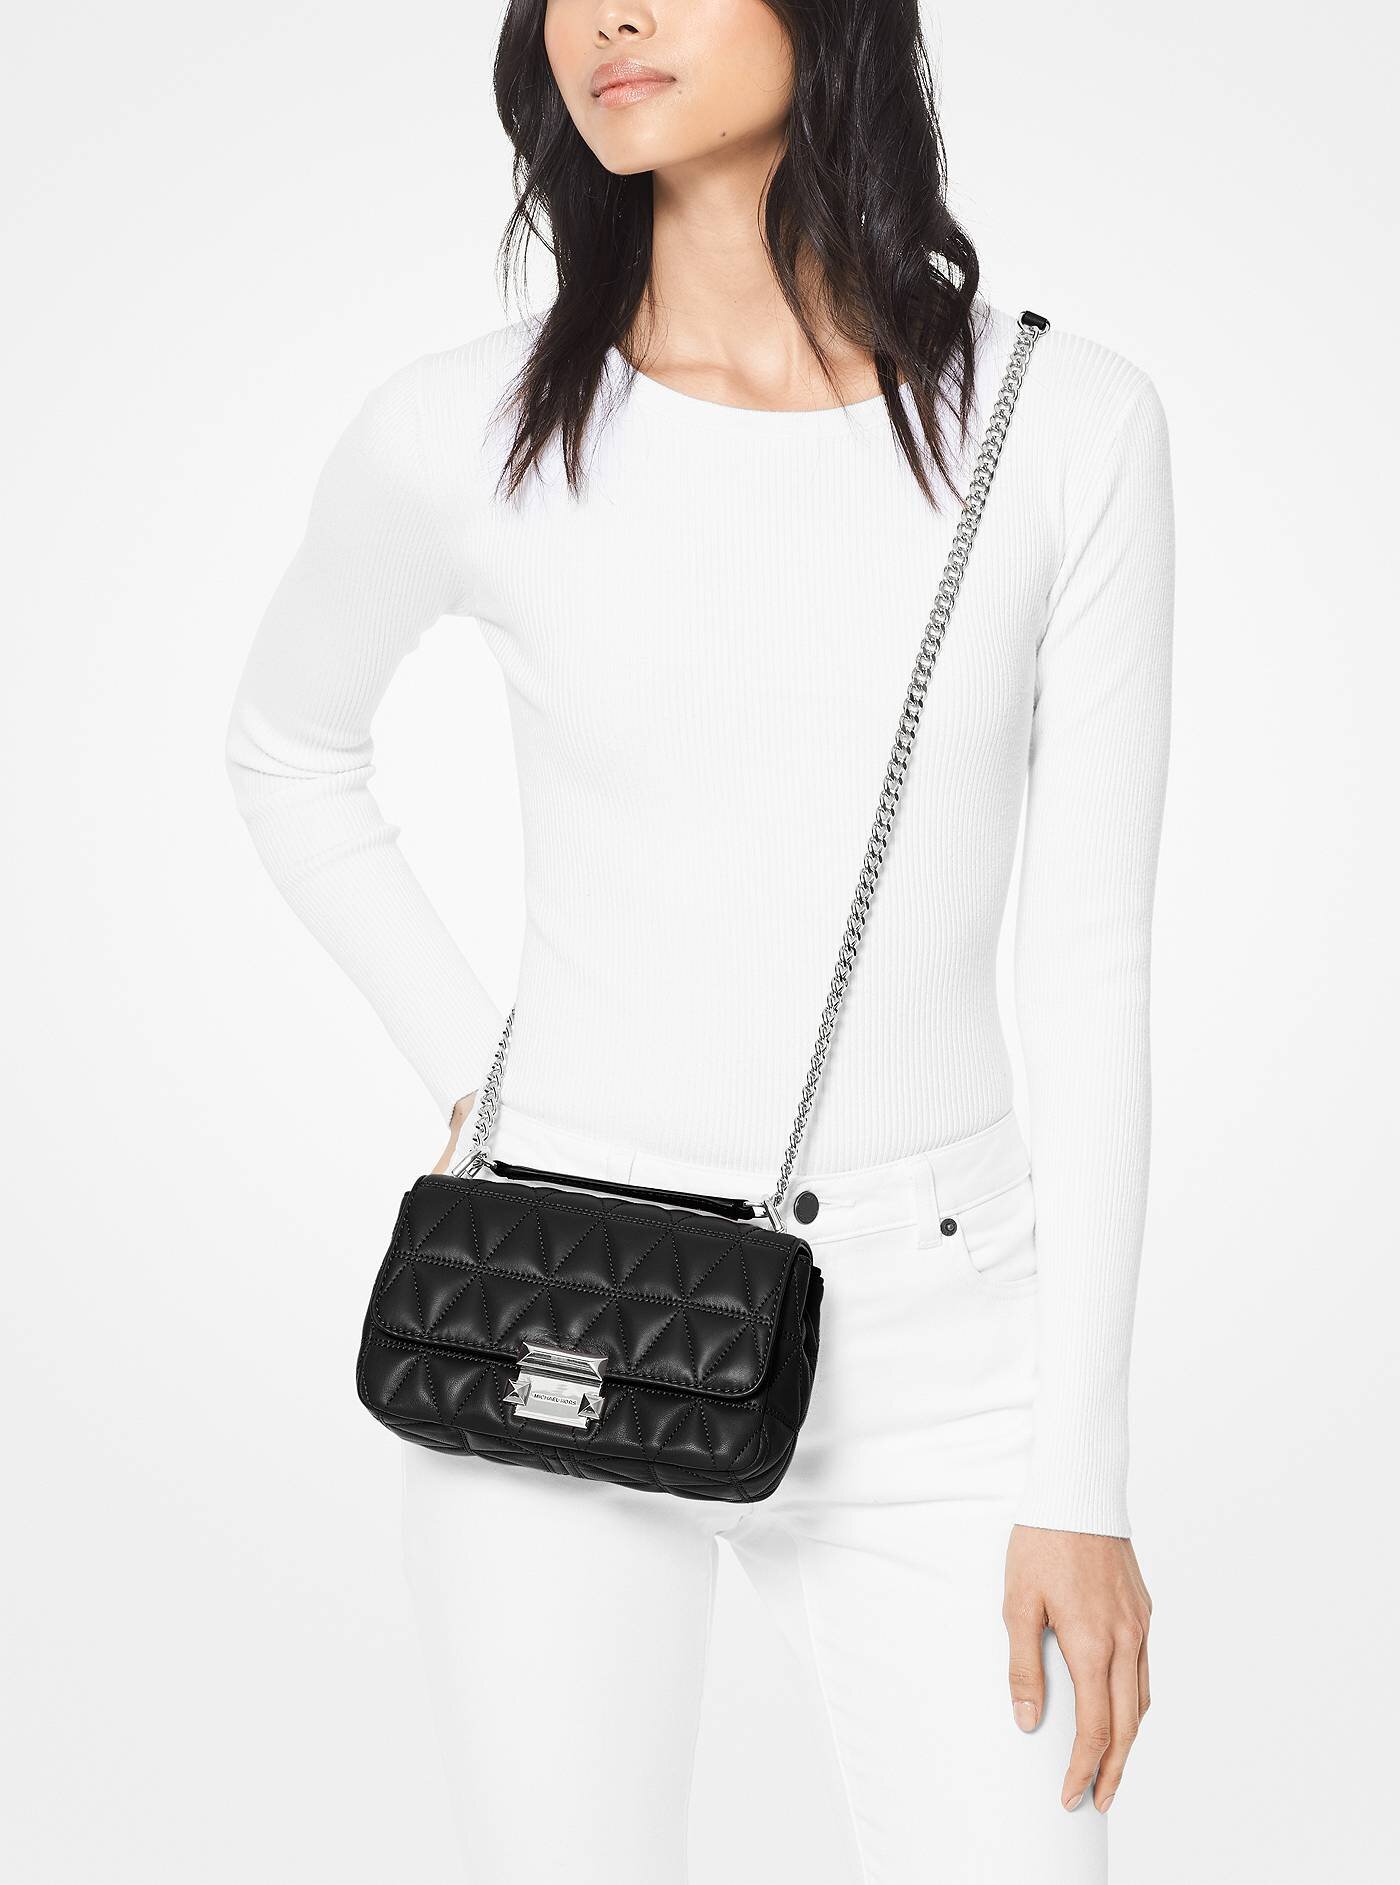 michael kors sloan small quilted